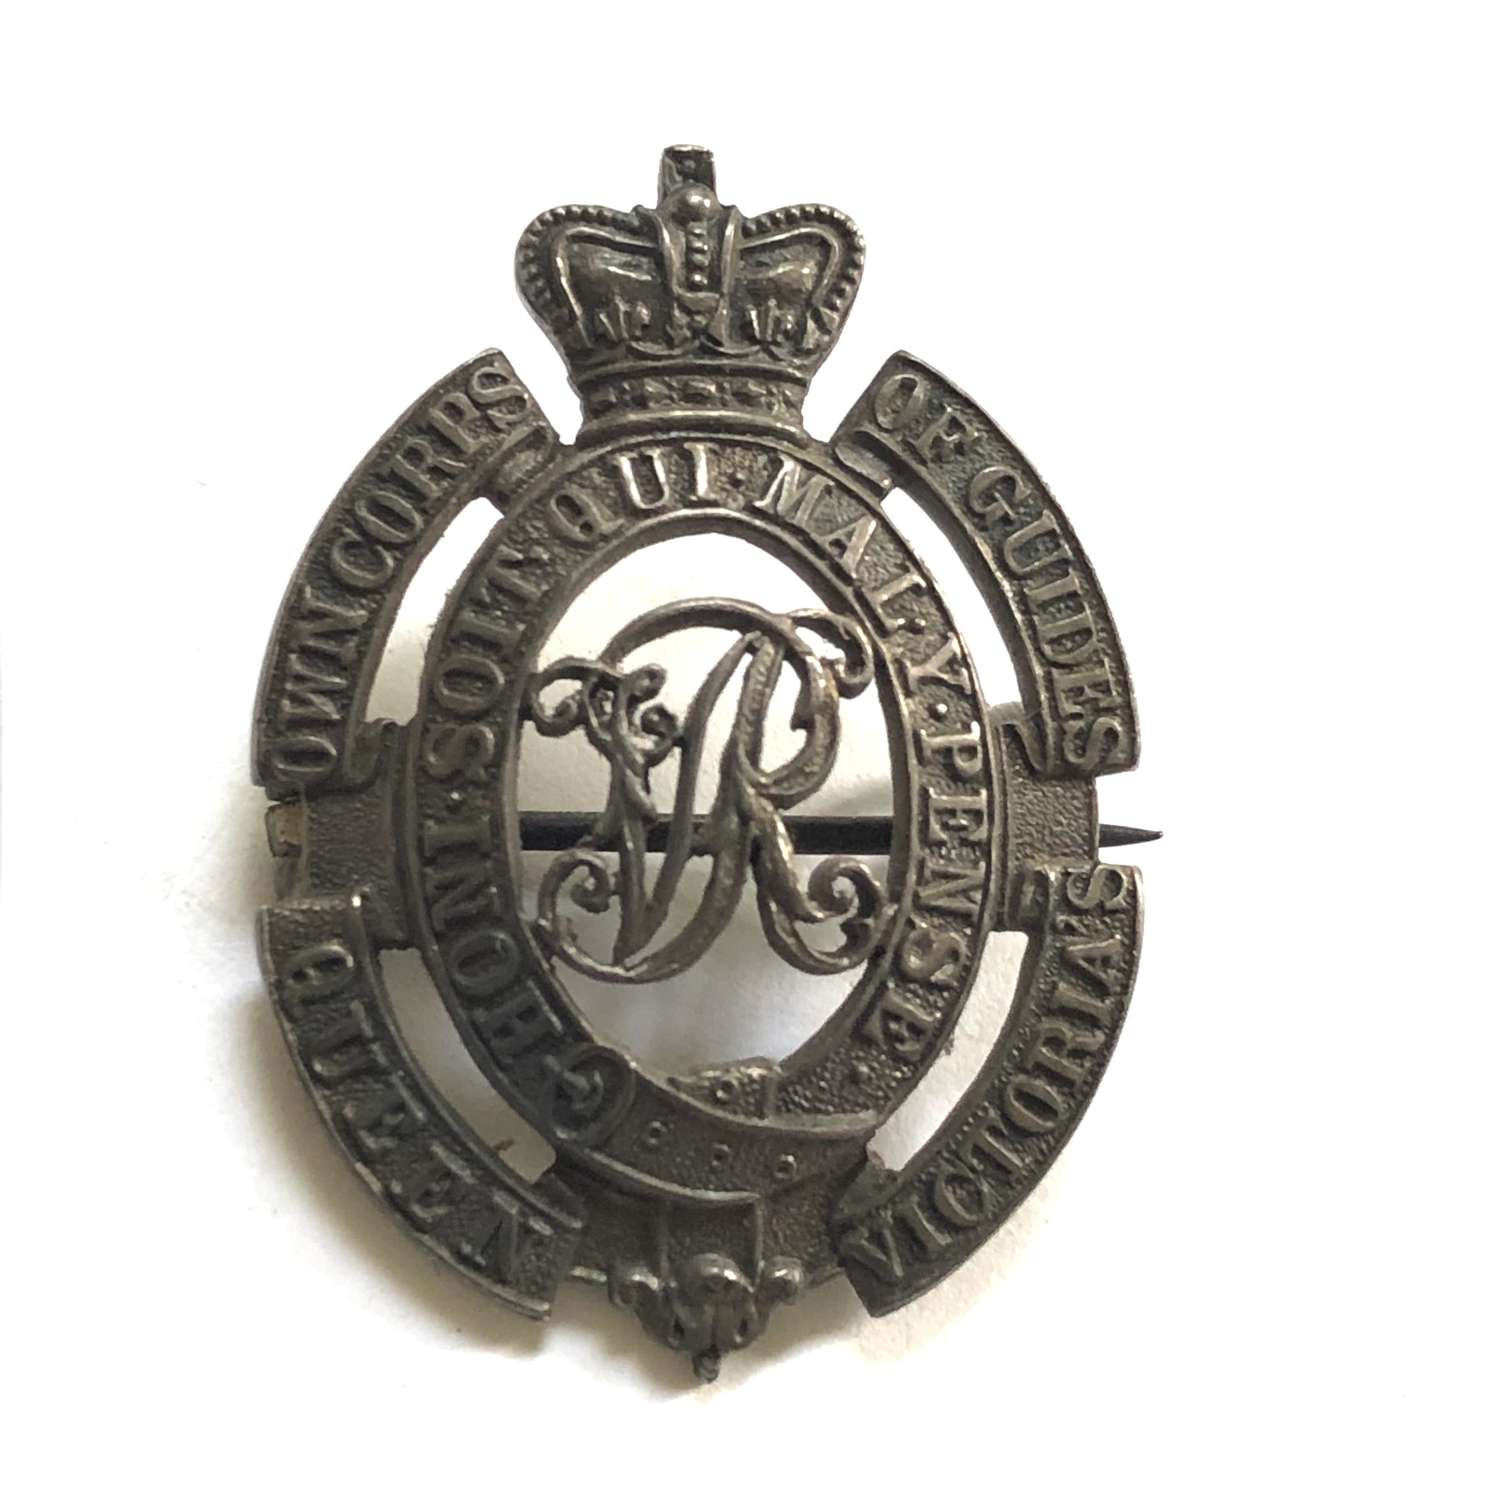 Queen Victoria’s Own Corps of Guides (Lumden’s) 1913 silver badge